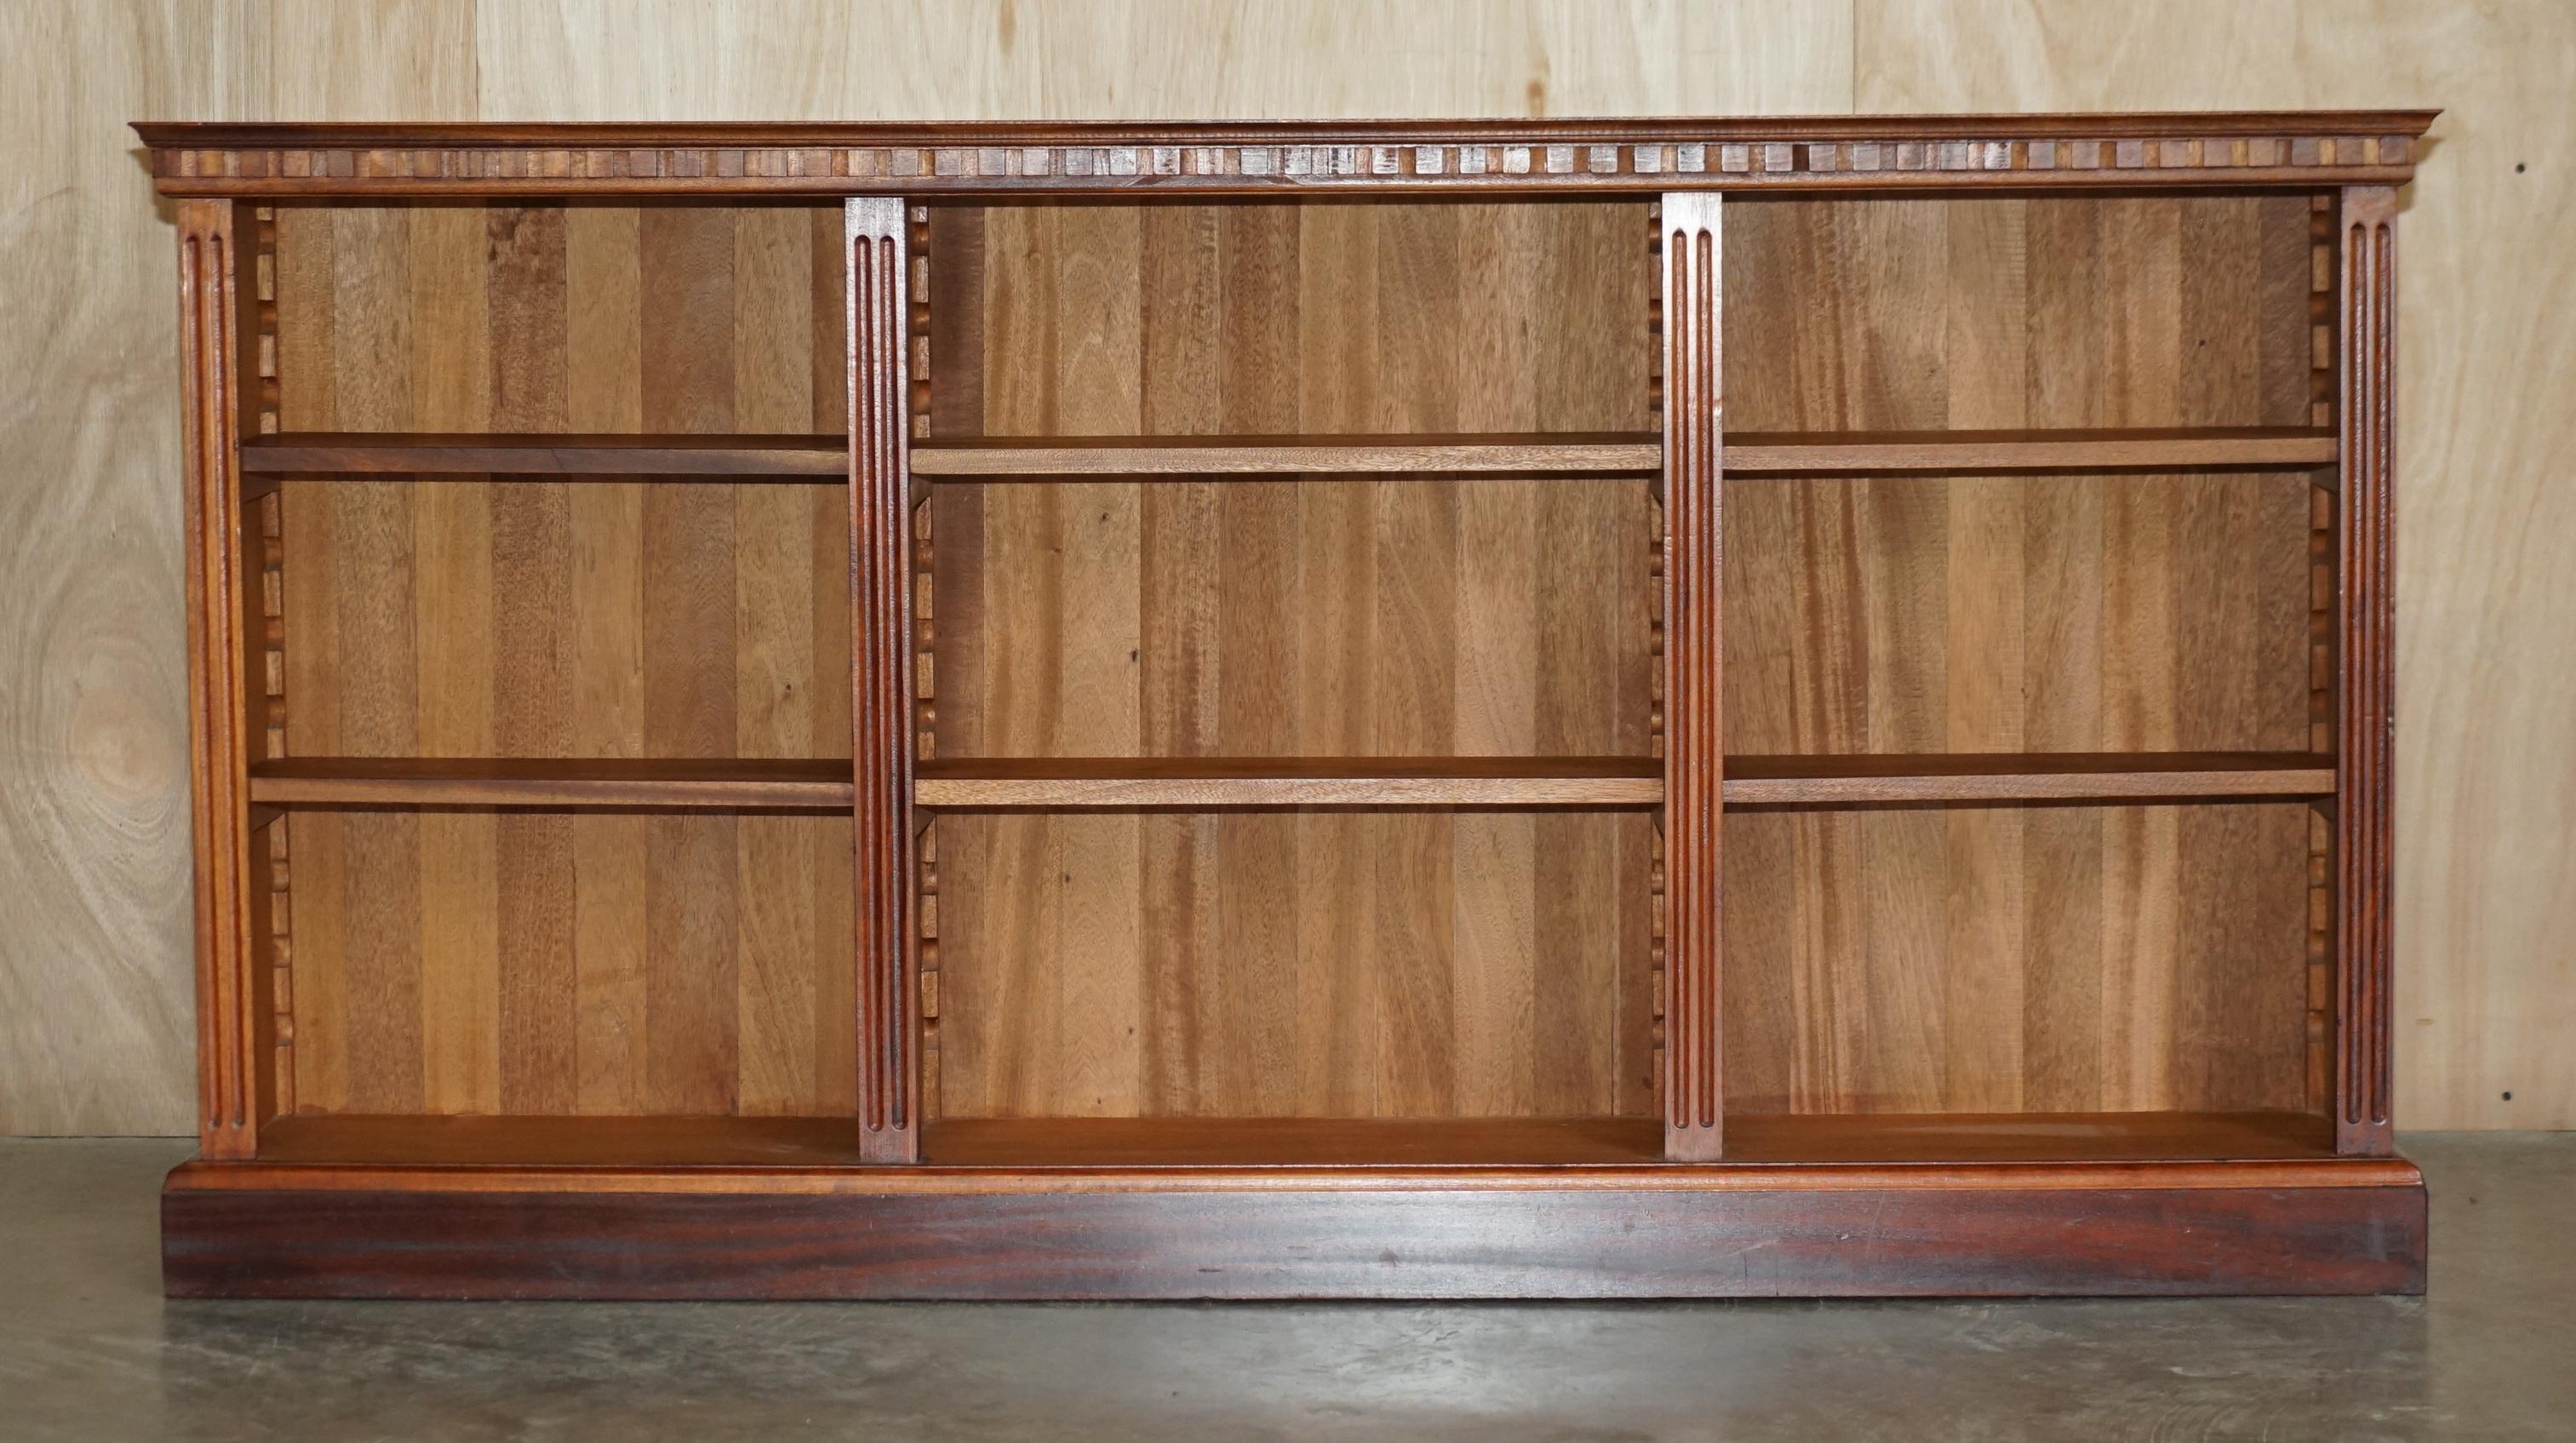 We are delighted to offer for sale this lovely solid mahogany open library bookcase / sideboard.

A good looking and utilitarian piece of furniture, it looks good in any setting, the shelves are all height adjustable to fit your book sizes